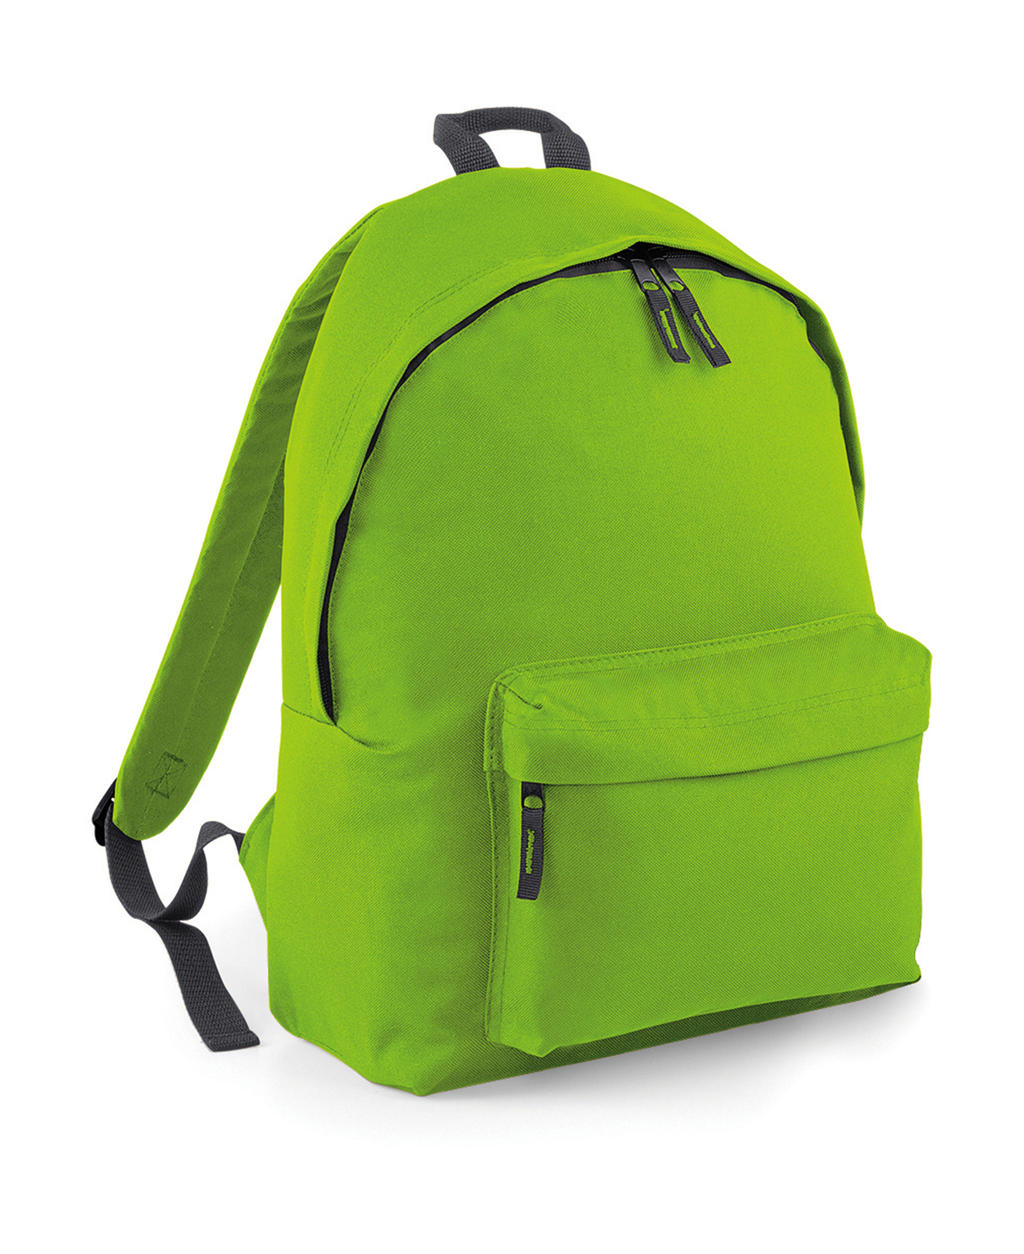  Original Fashion Backpack in Farbe Lime/Graphite Grey